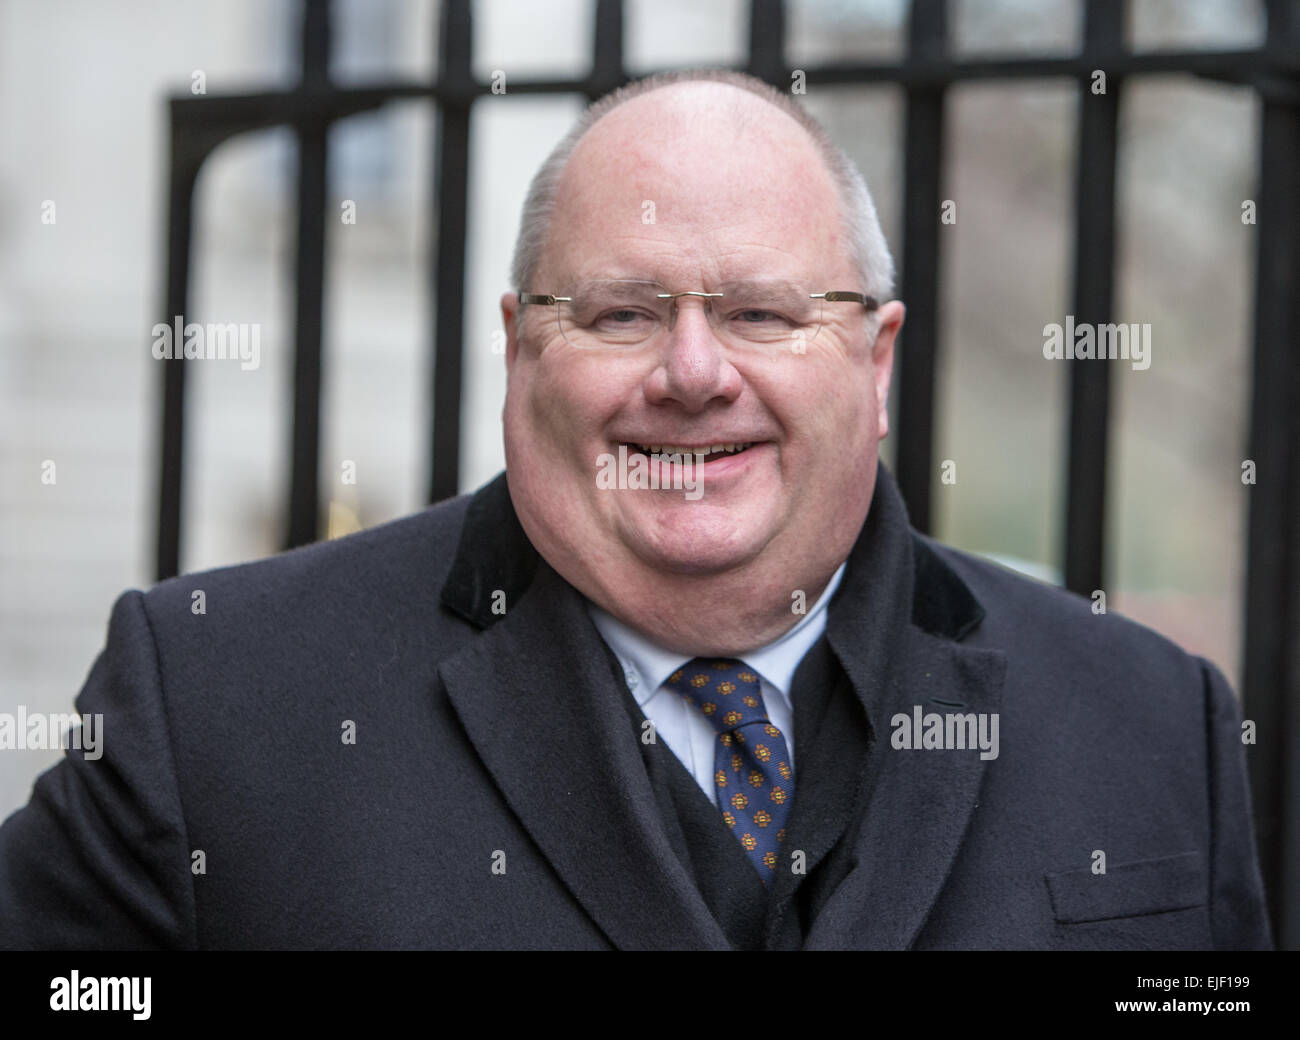 Eric Pickles,Secretary of State for Communities and Local Government, in Downing street for a cabinet meeting Stock Photo